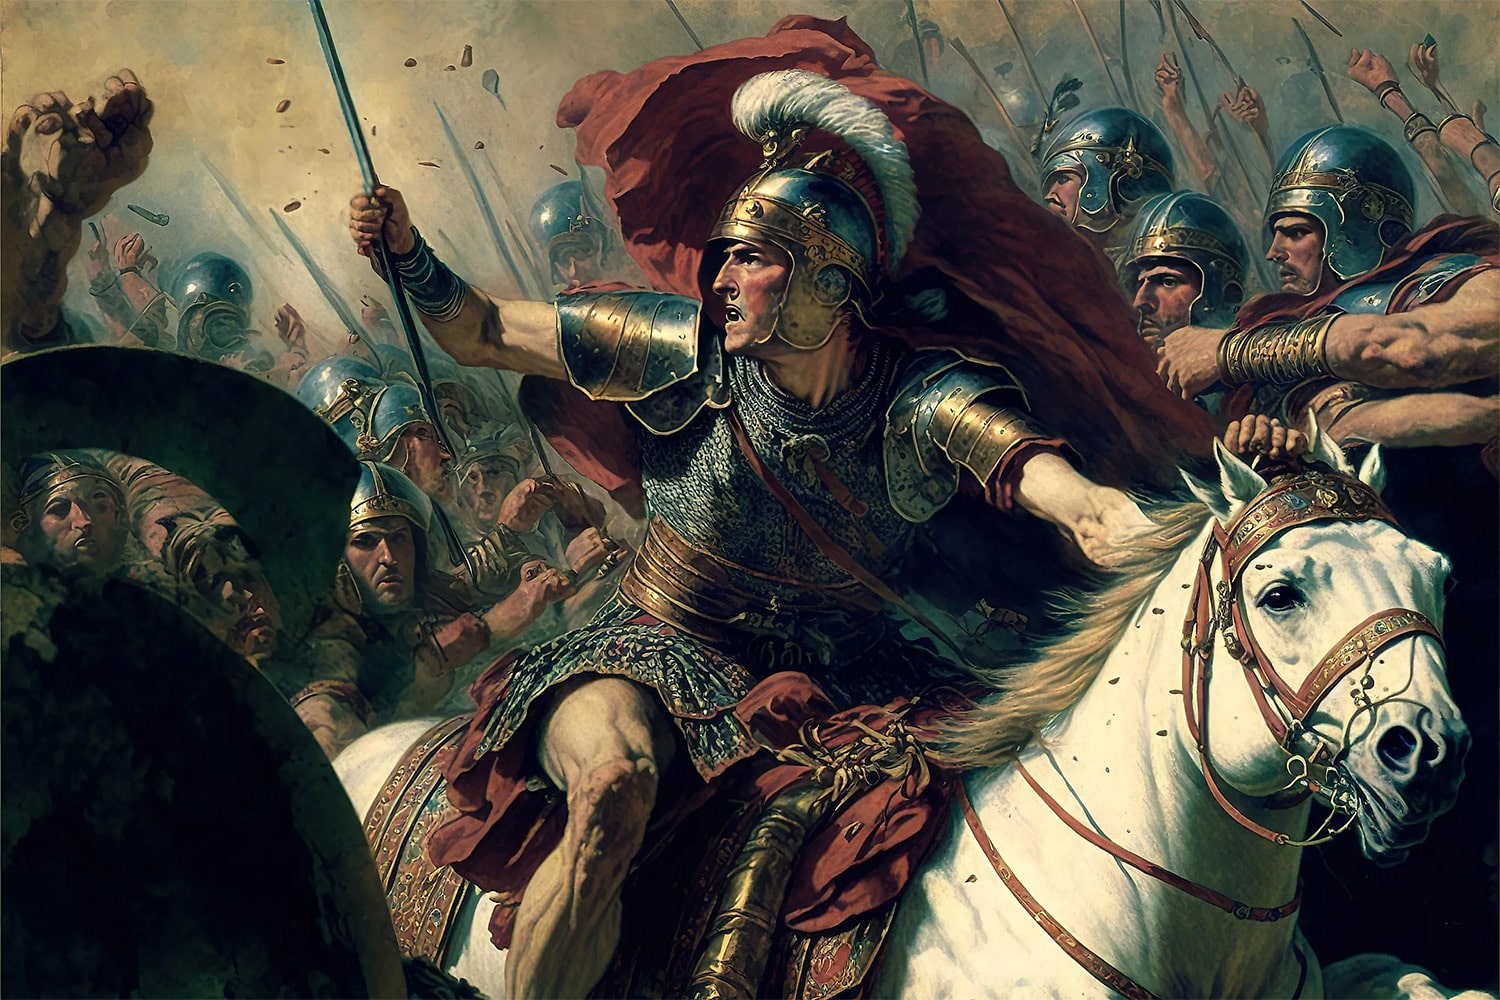 17 interesting facts about Alexander the Great